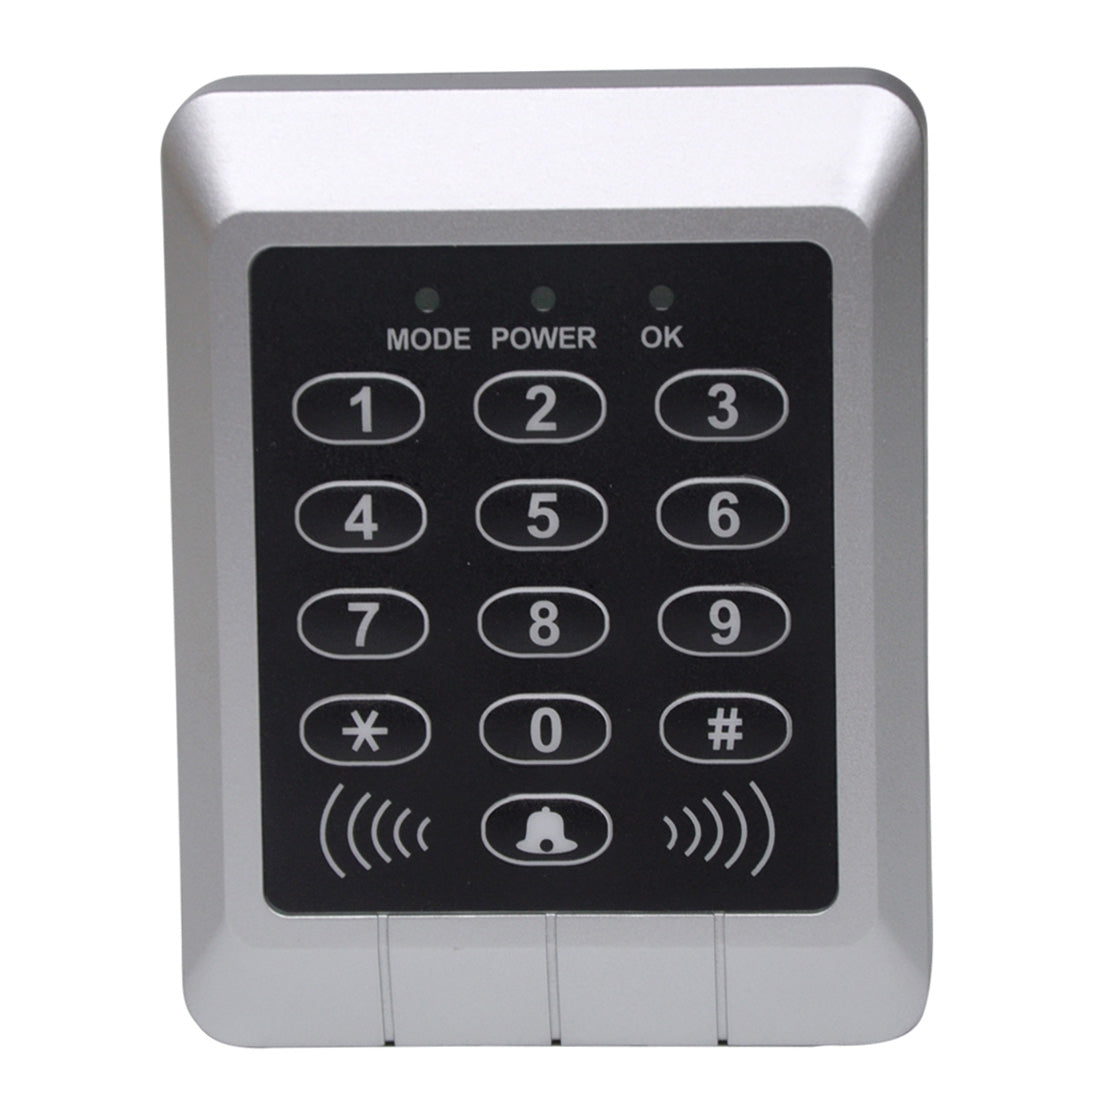 X4 RFID Single Door Access Control System with Keypad & 10 ID Card Token Keyfobs, Support Password & EM / IC Card Reader